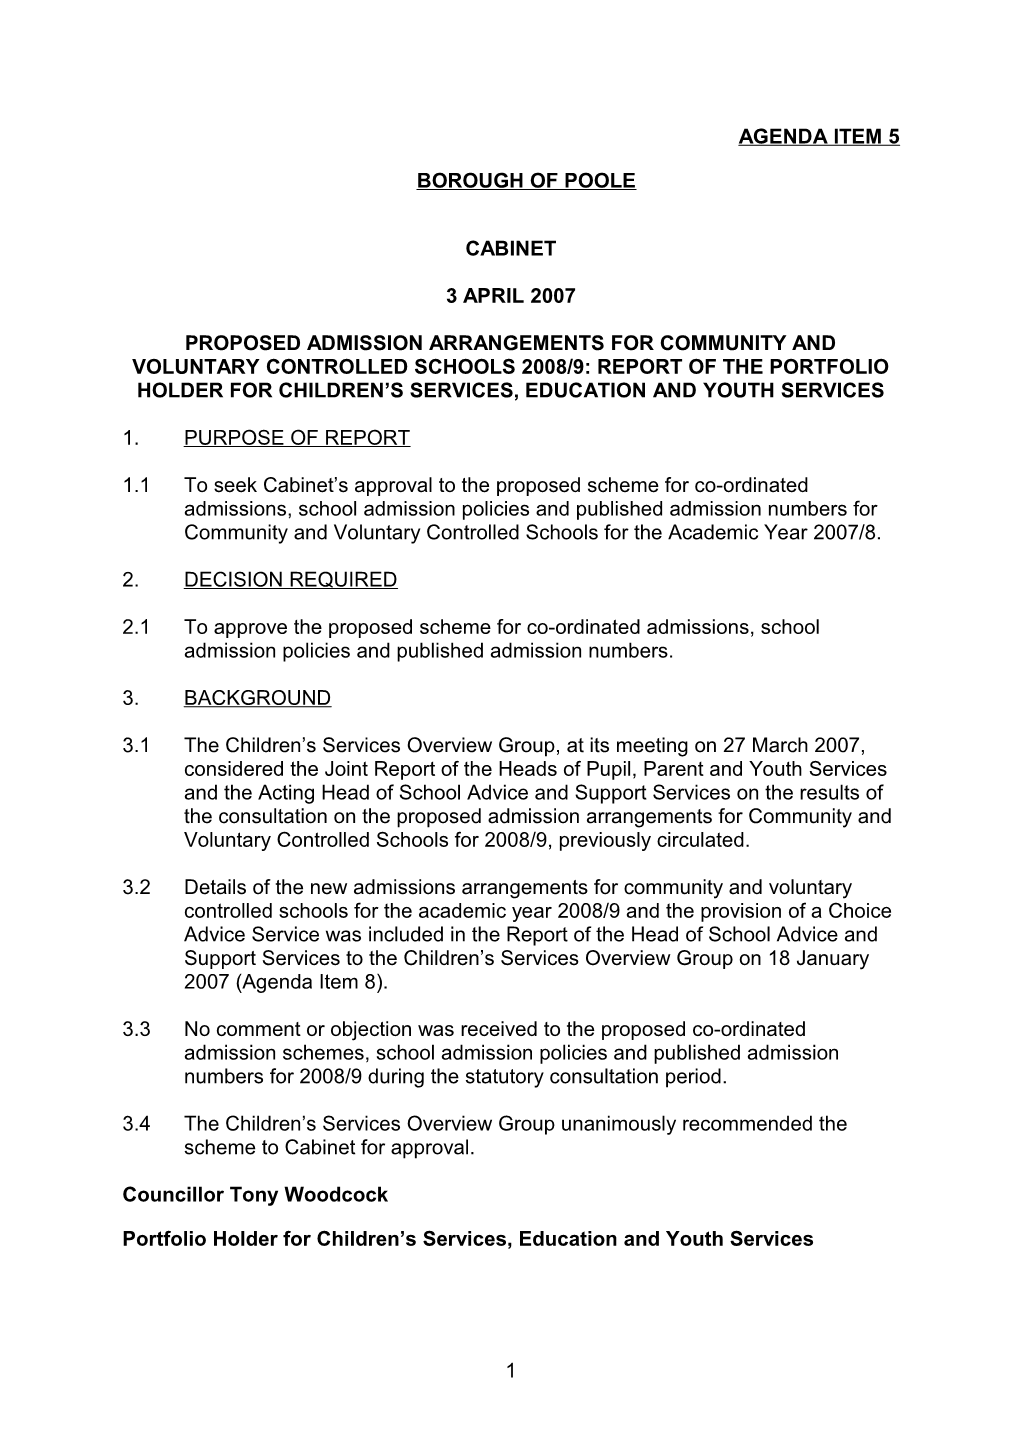 Proposed Admission Arrangements for Community and Voluntary Controlled Schools for 2008/9